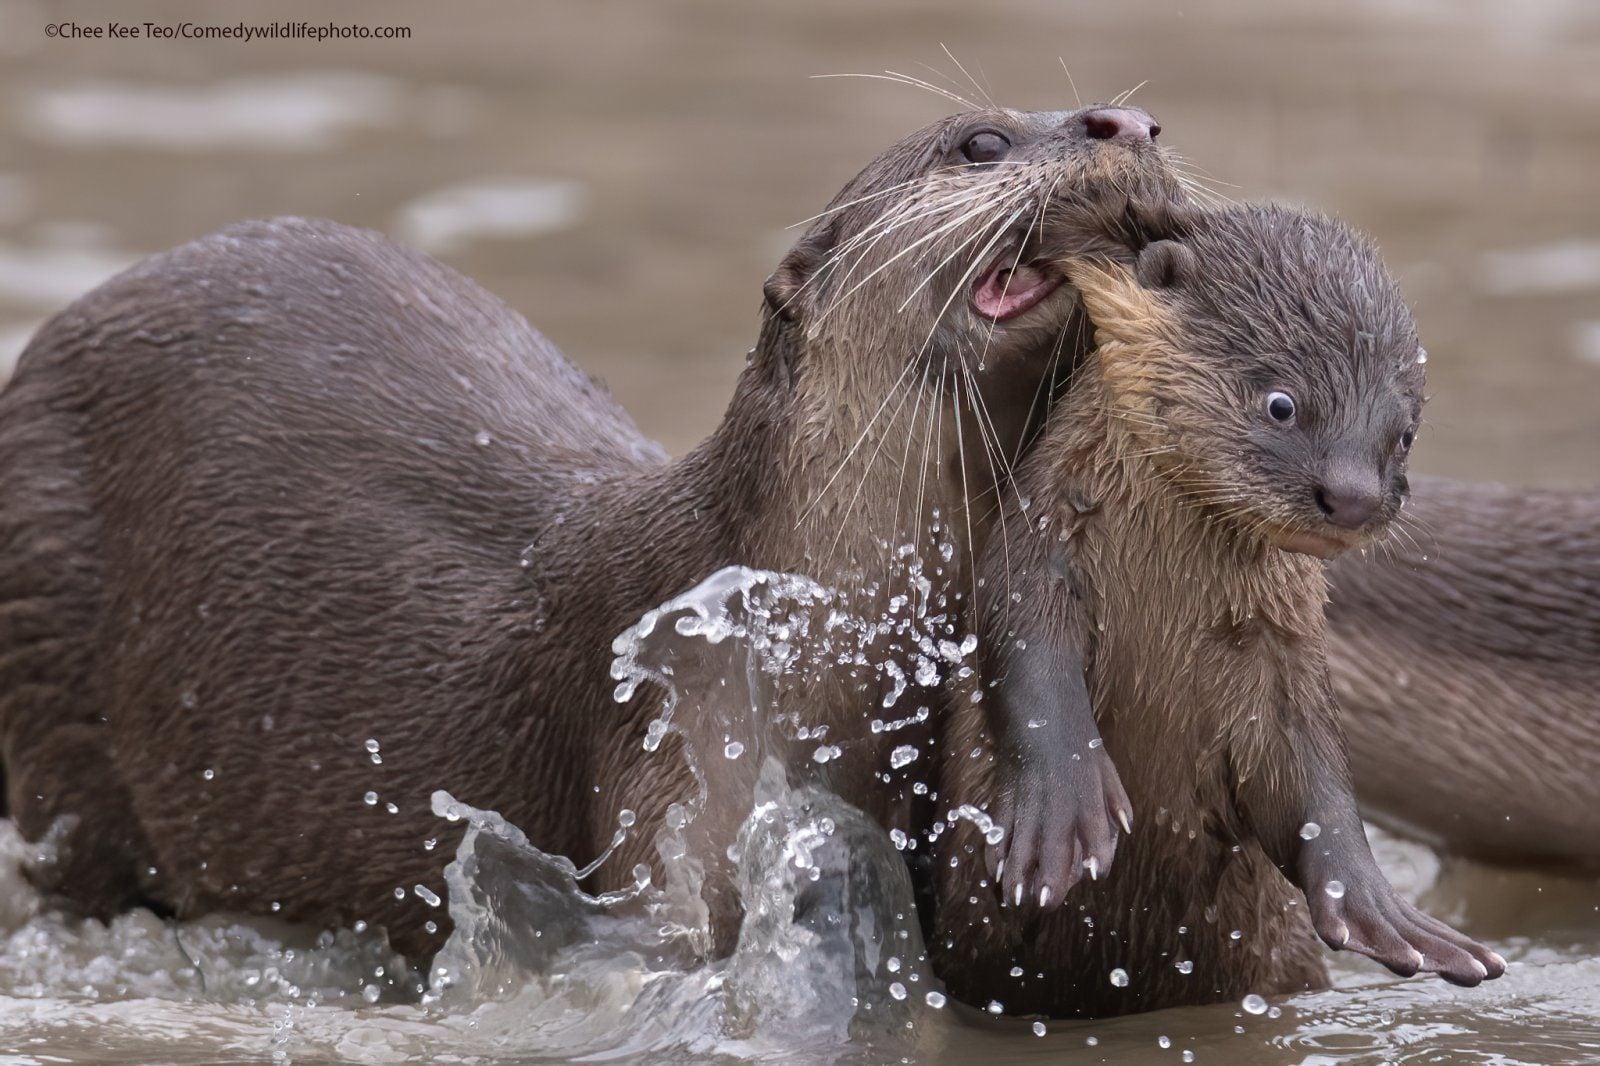 Winners of the 2021 Most Funny Wildlife Photo Contest